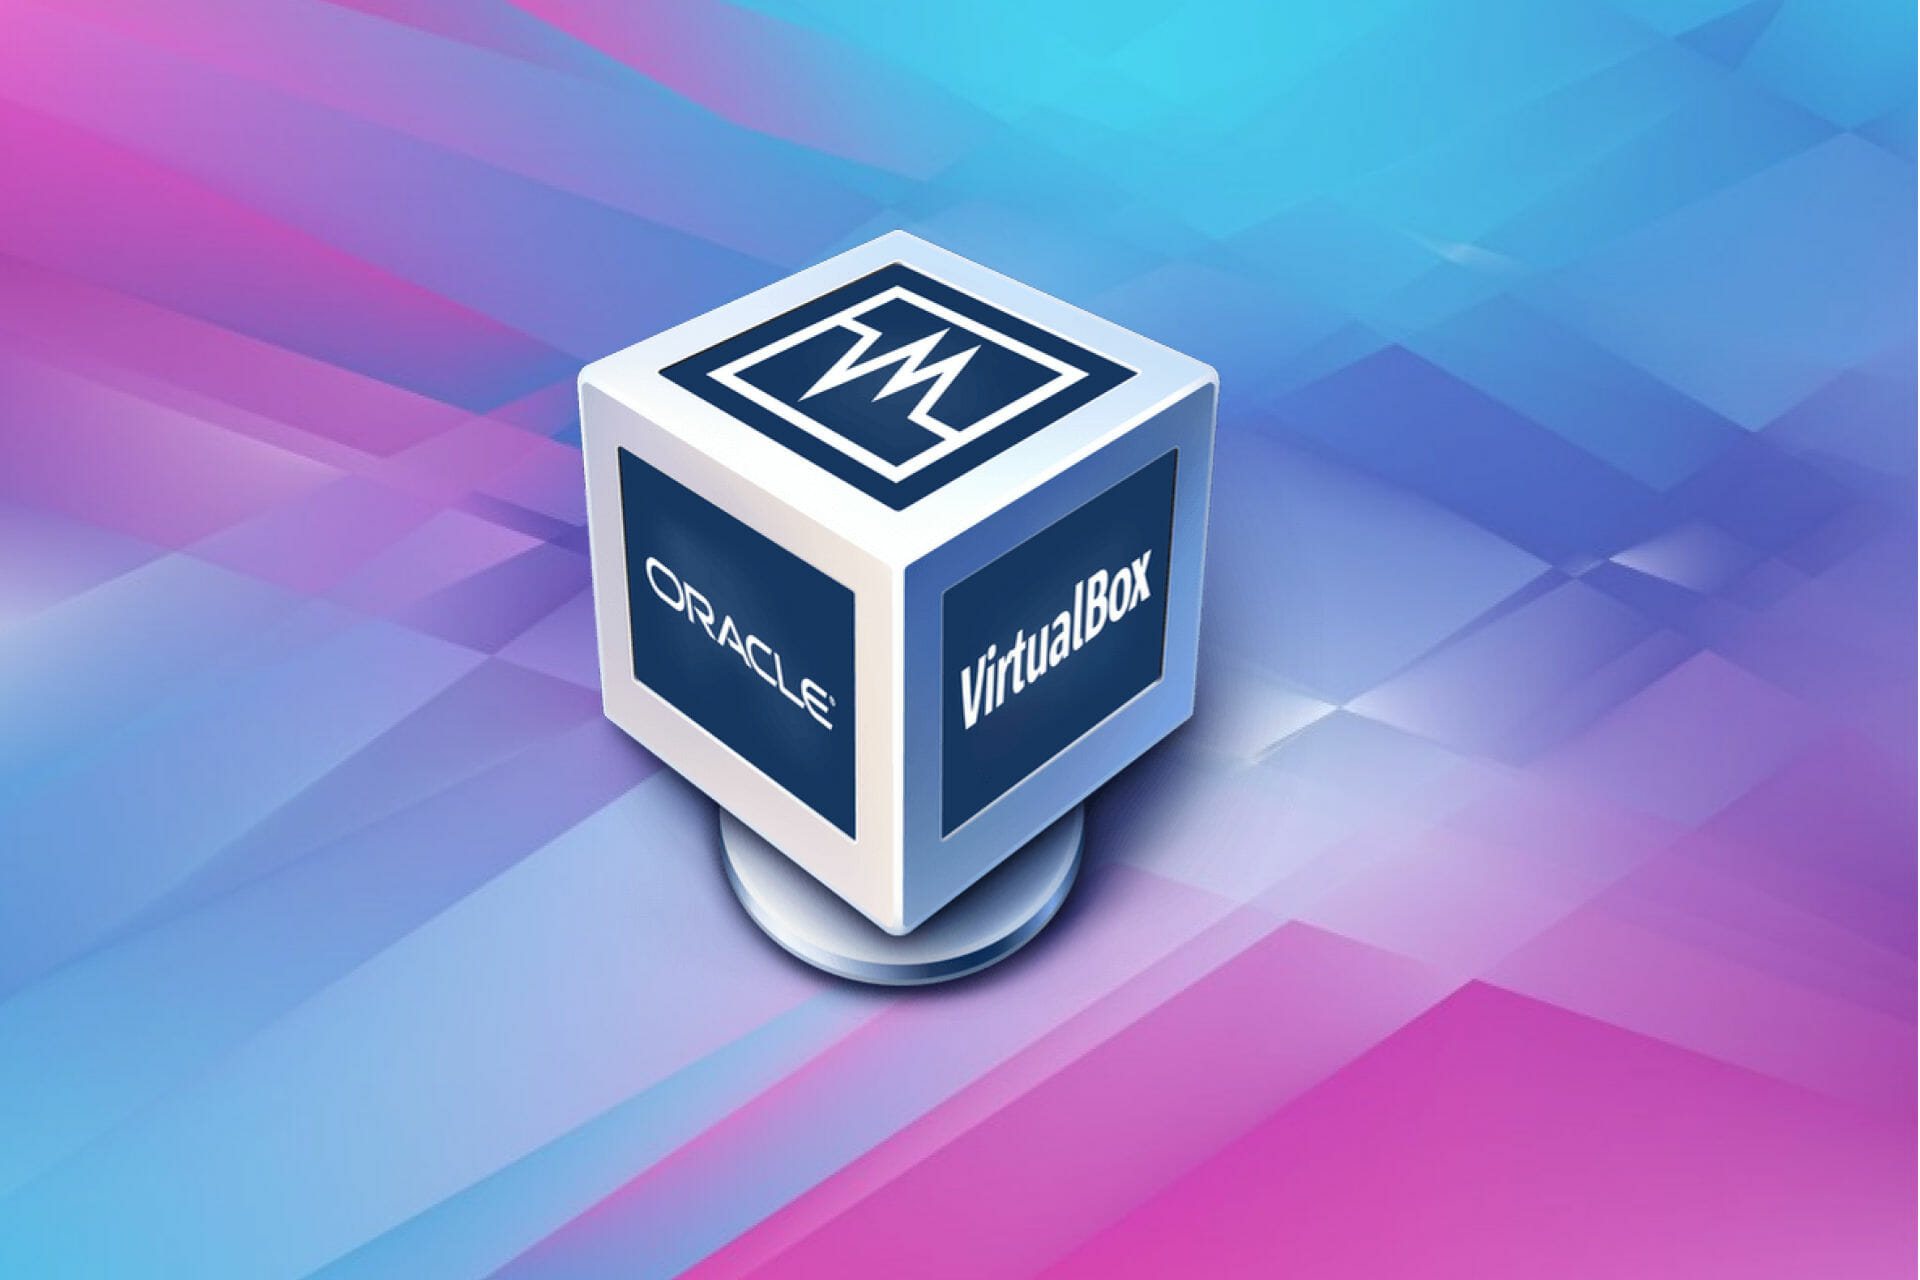 Hpw to fix the VirtualBox is not opening in Windows 10 issue